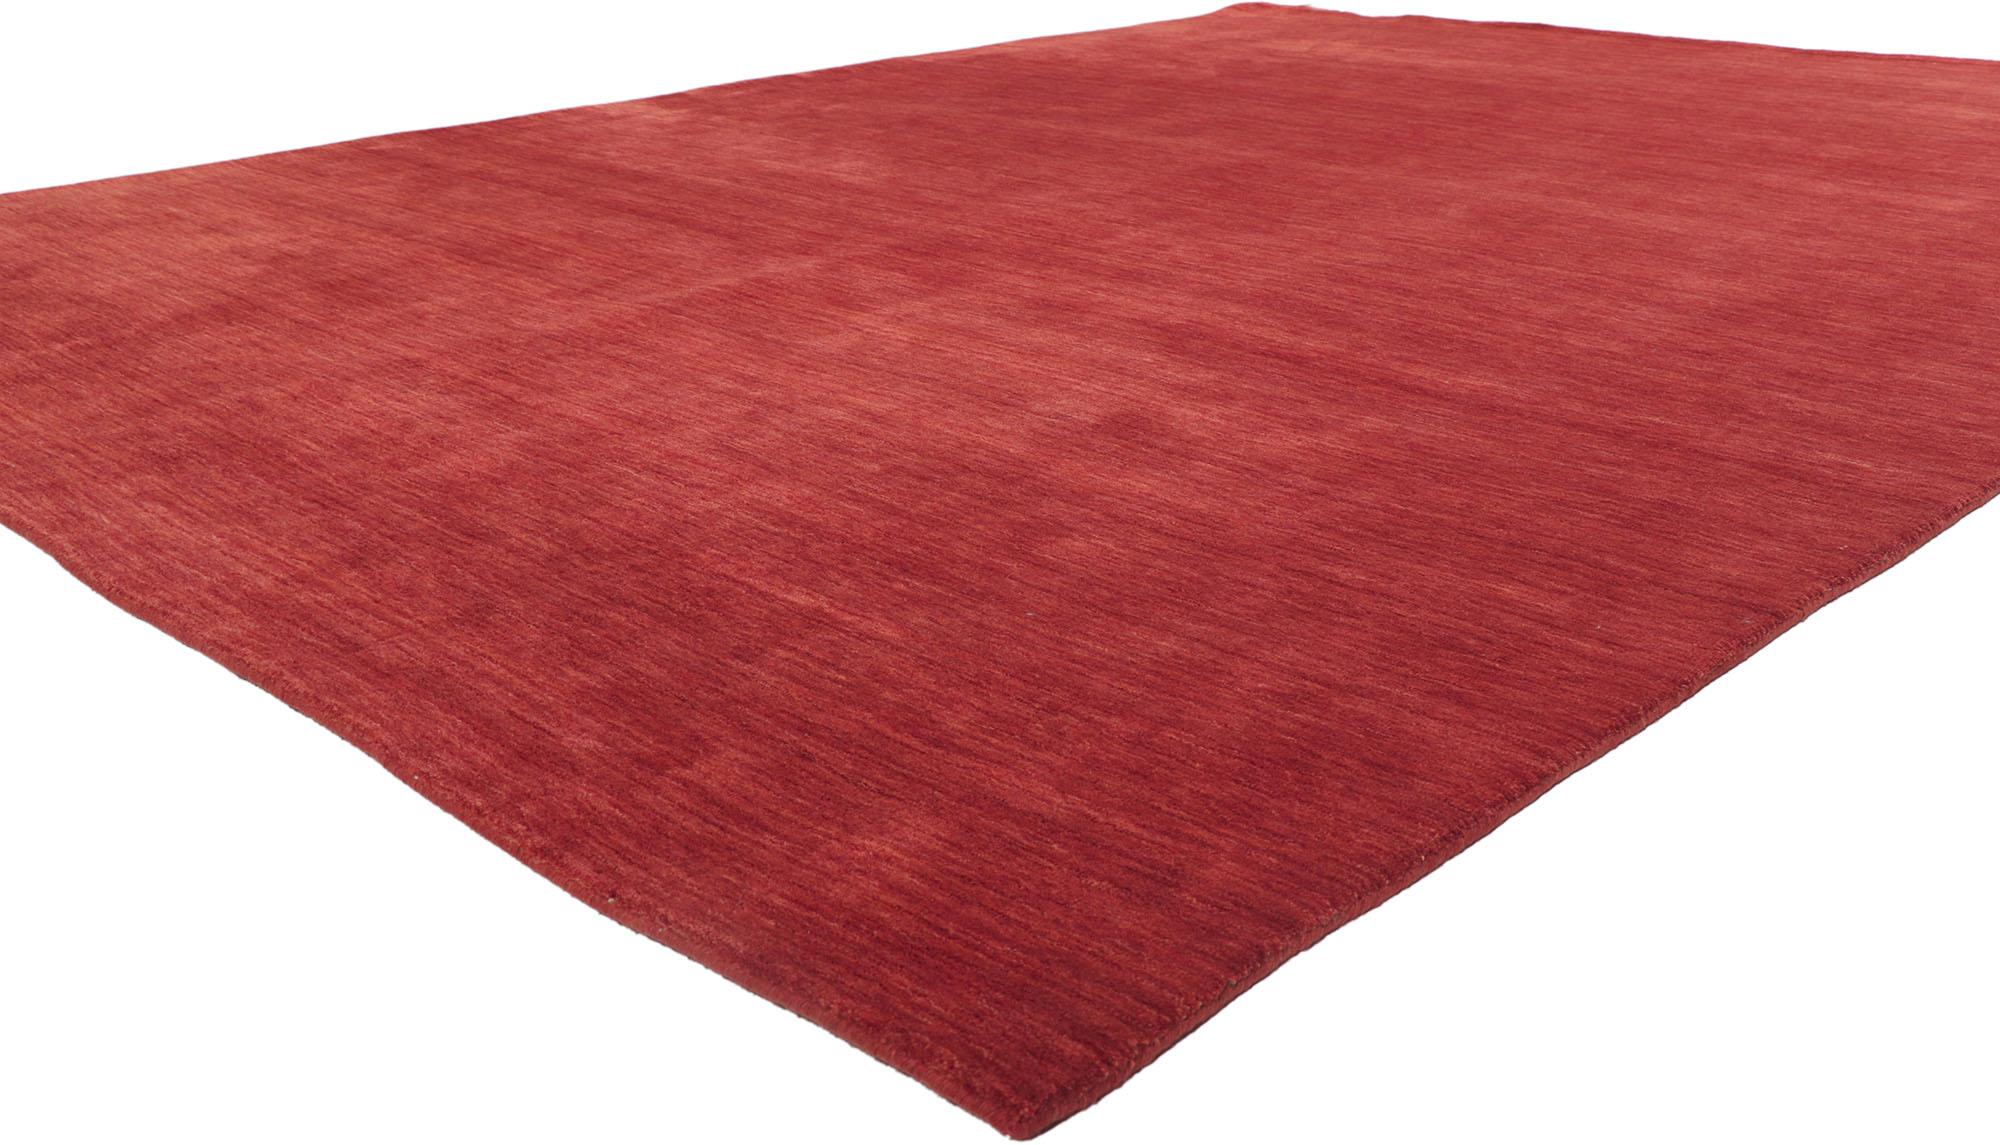 30734 New contemporary red area rug with modern style 08'10 x 11'10. Effortless, elegant, and casual meets the eye in this contemporary Indian area rug. It features gorgeous red hues and softly gradated striations running selvage to selvage blending